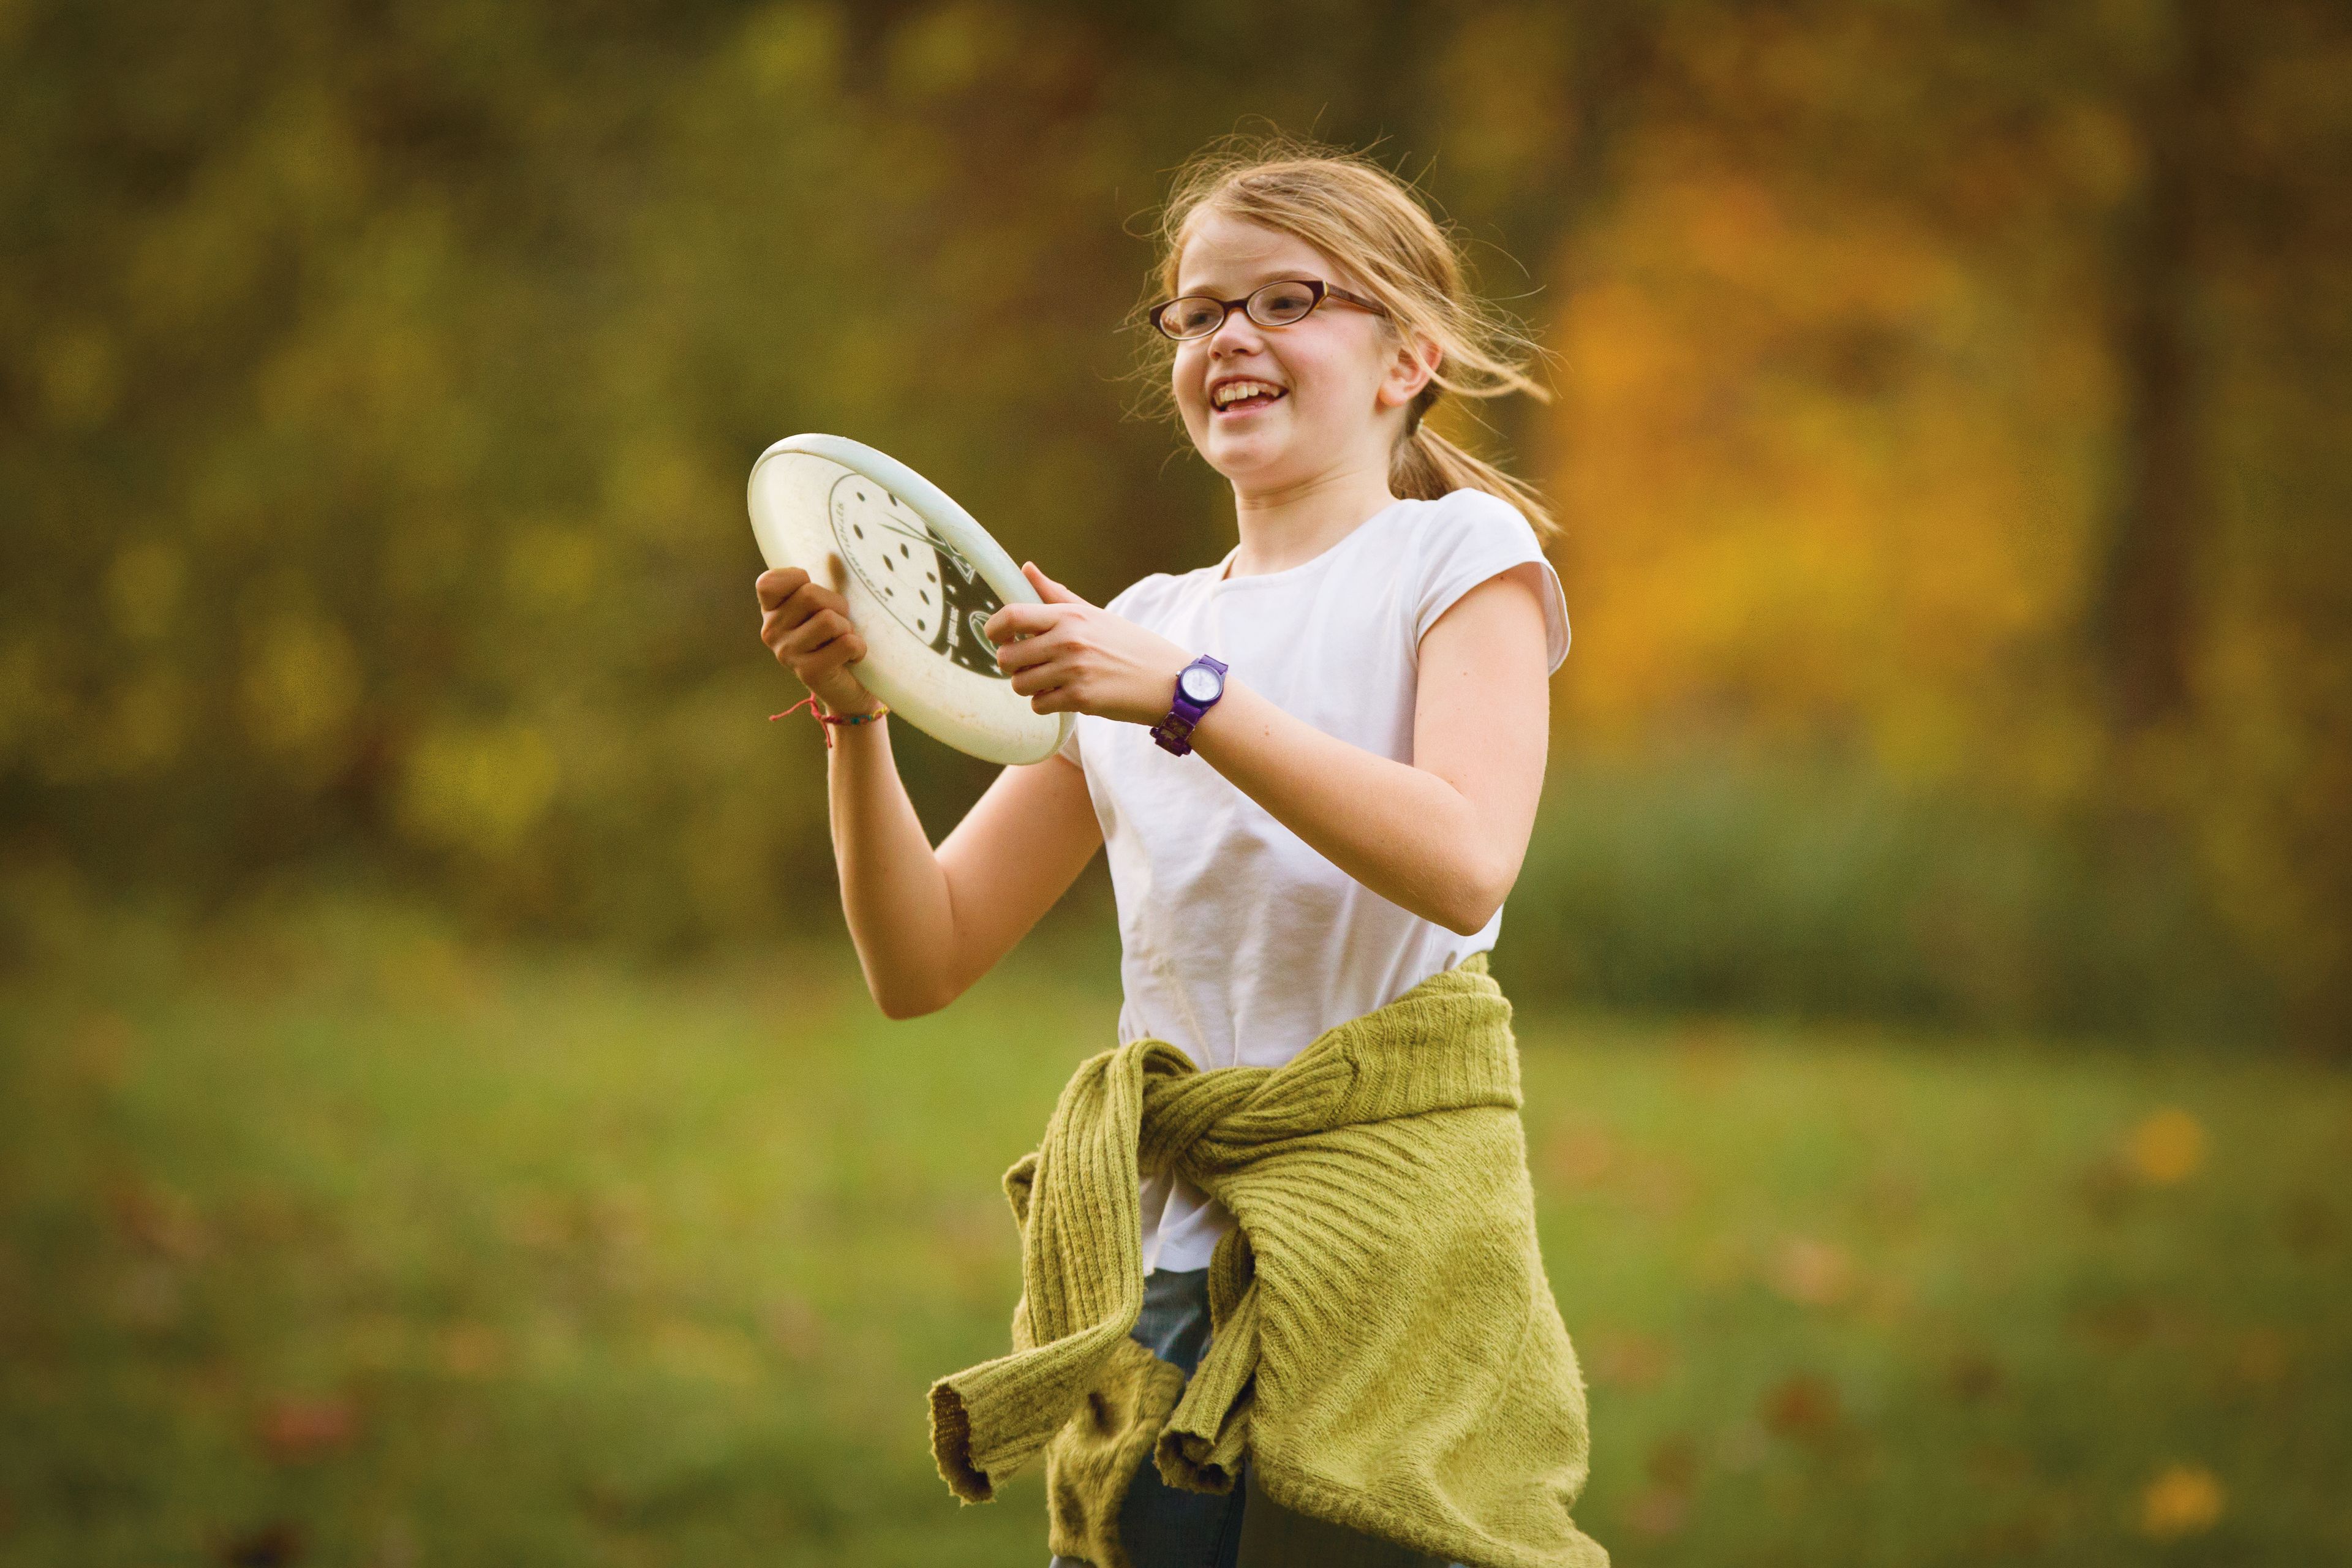 A young girl plays outside with a Frisbee.